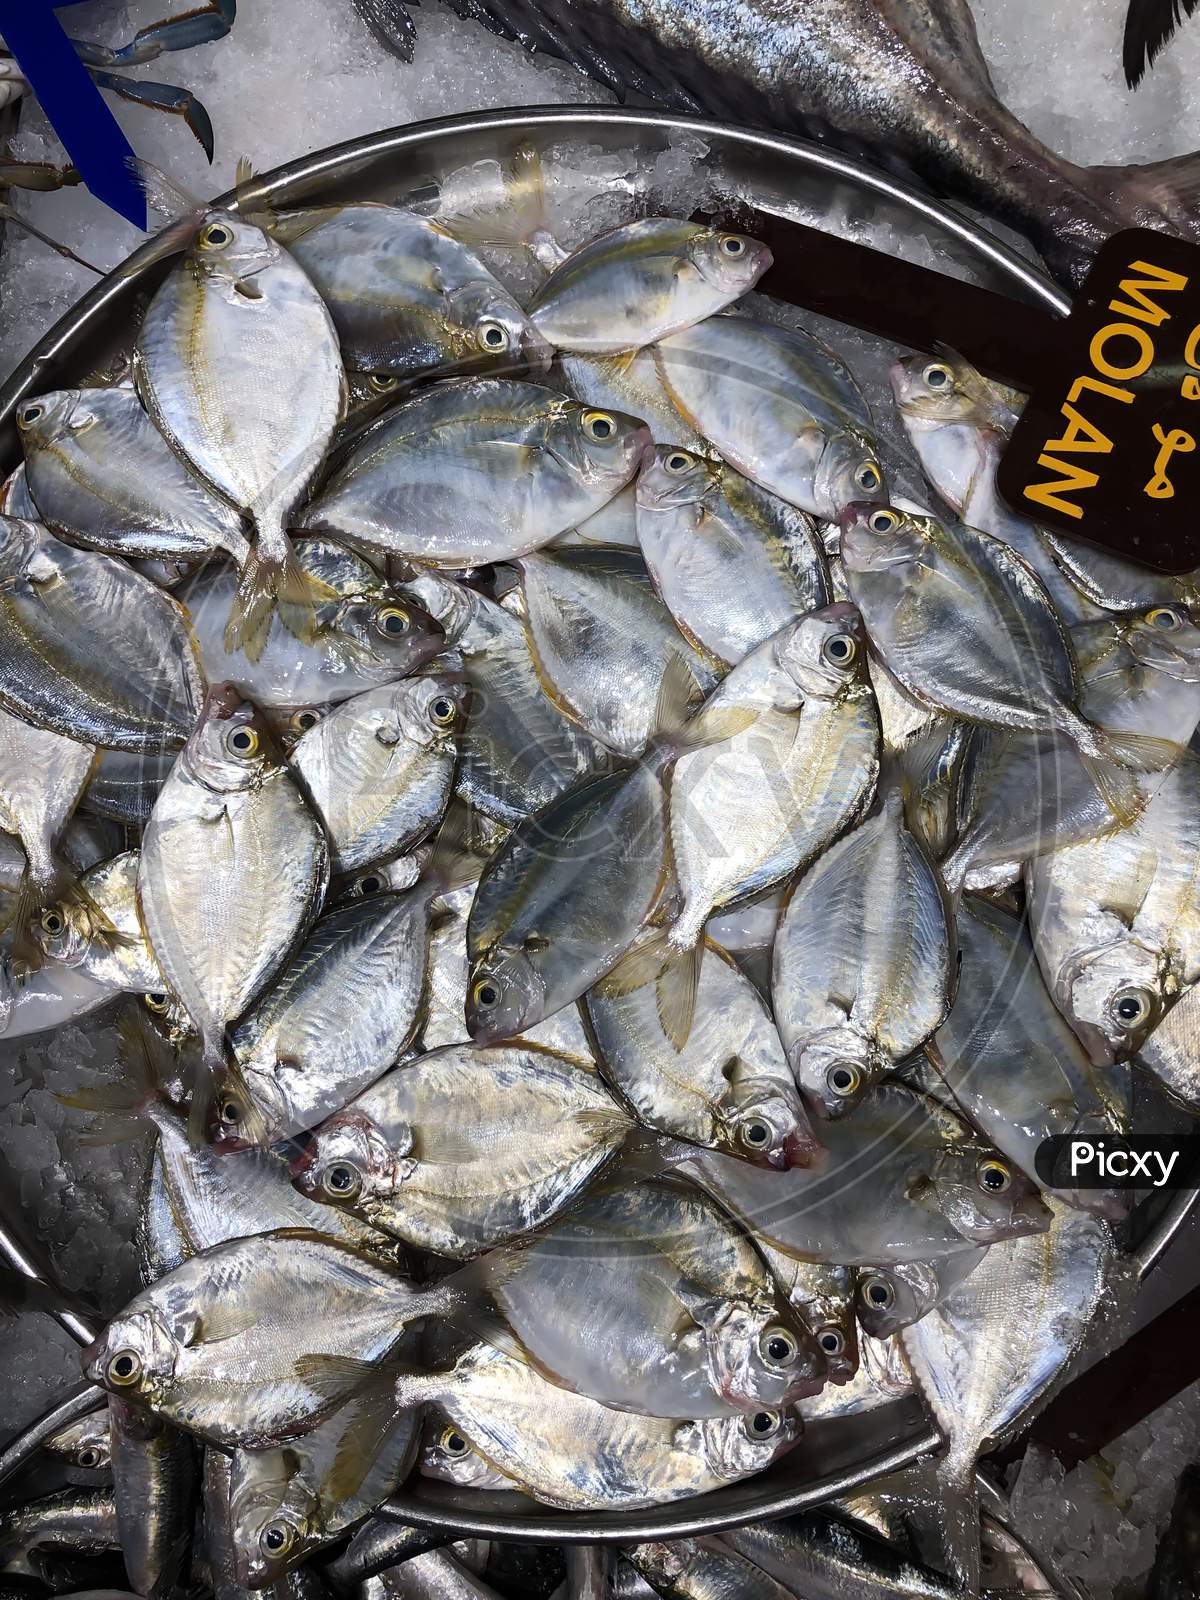 A Bunch Of Small White Pomfret In Abu Dhabi Fish Market